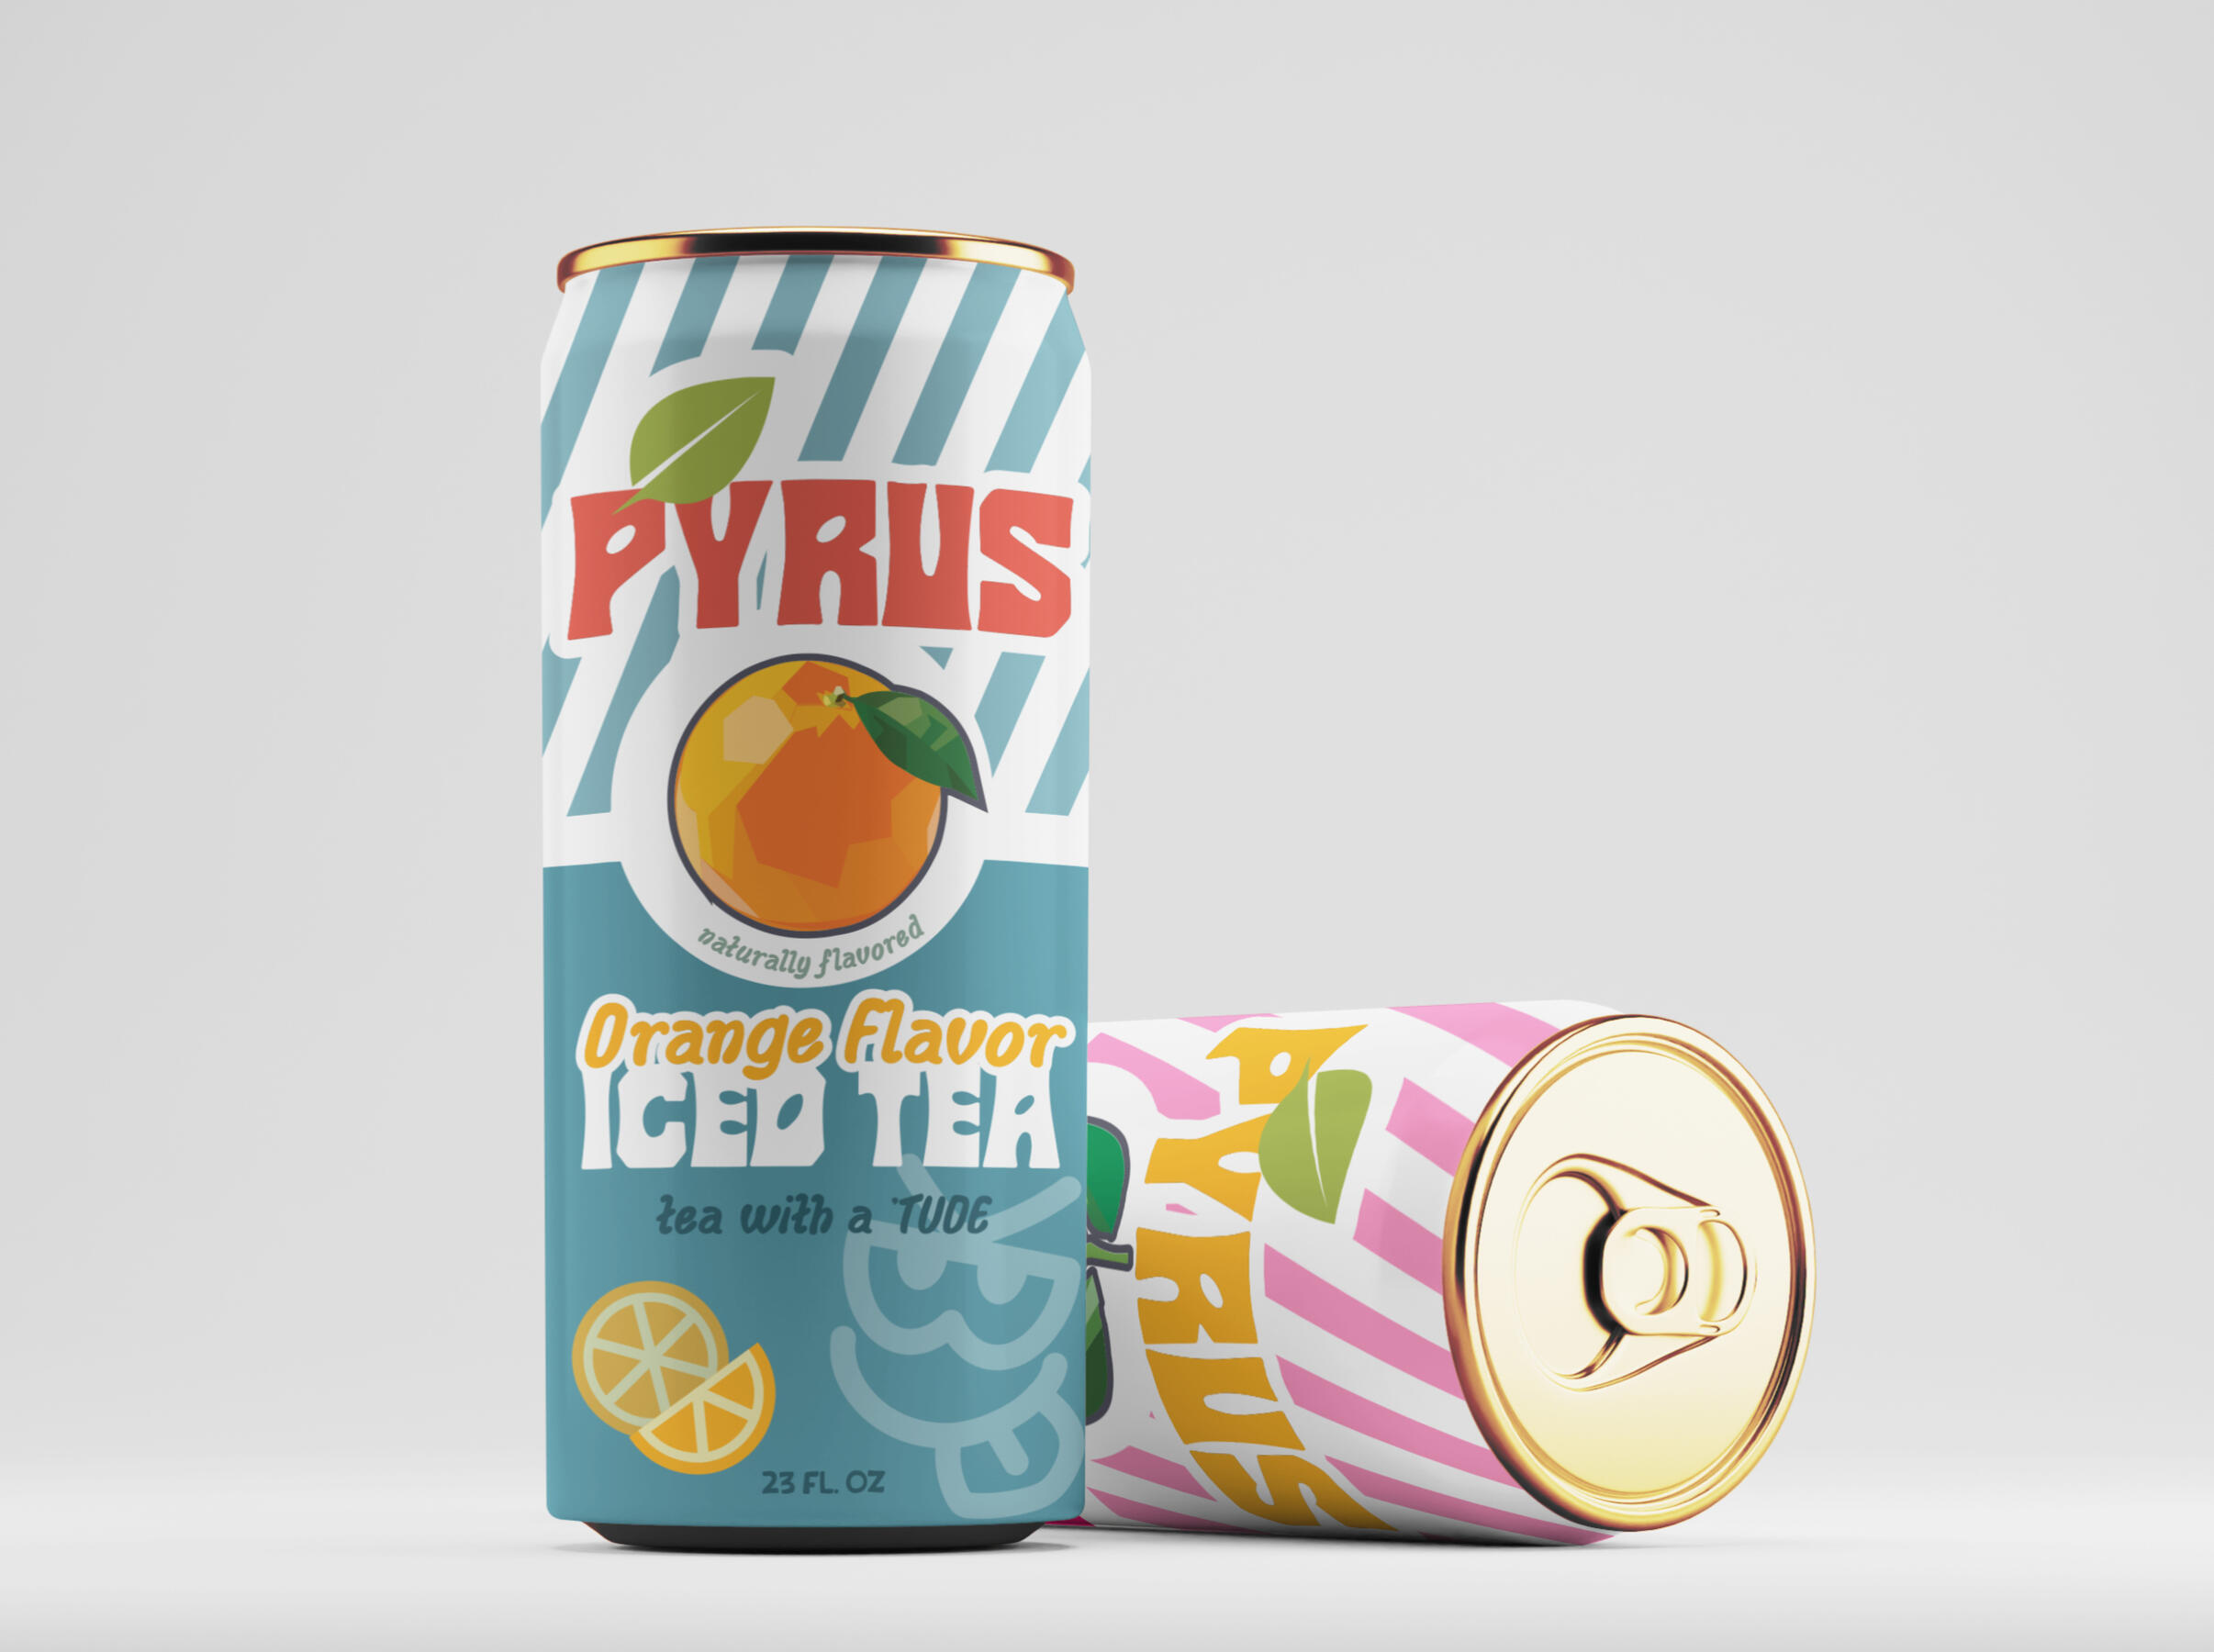 The Pyrus branding mocked up onto some cans.